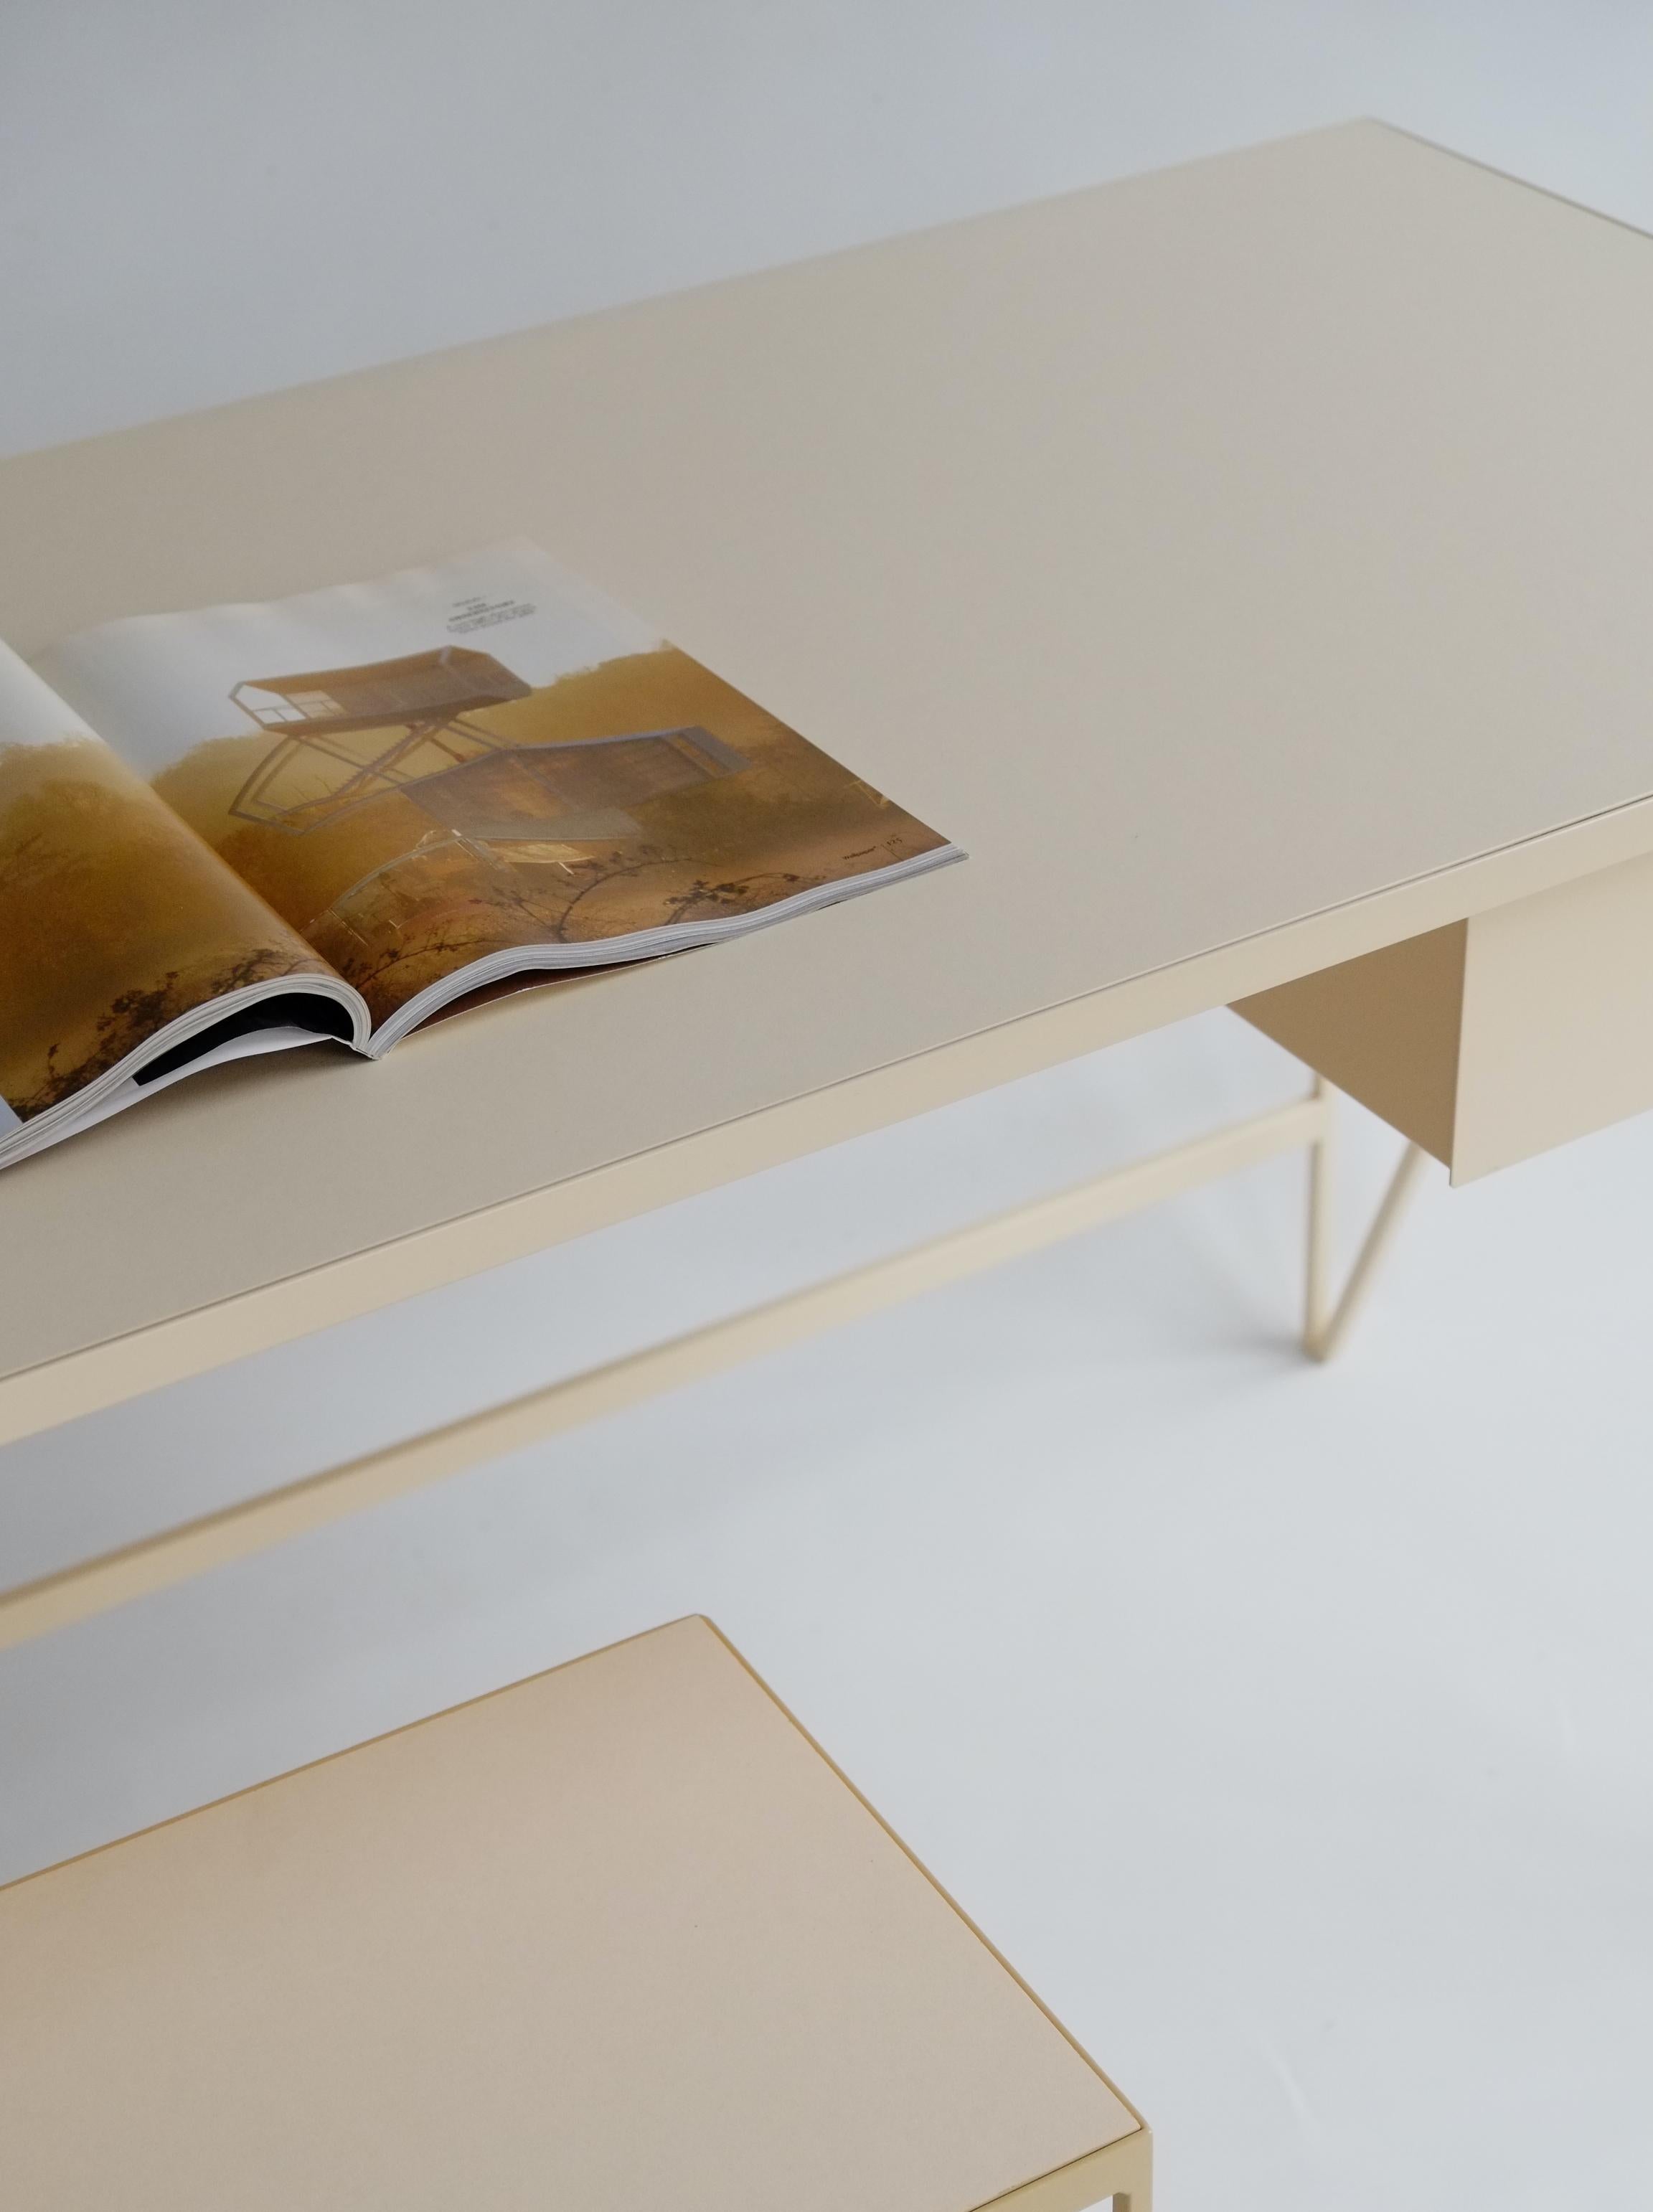 This study desk is made with a pearl powder-coated steel frame and colour matched natural linoleum tabletop. The linoleum for our desks is selected for the ecological properties of the linseed of which it is made. It also has a smooth and hard